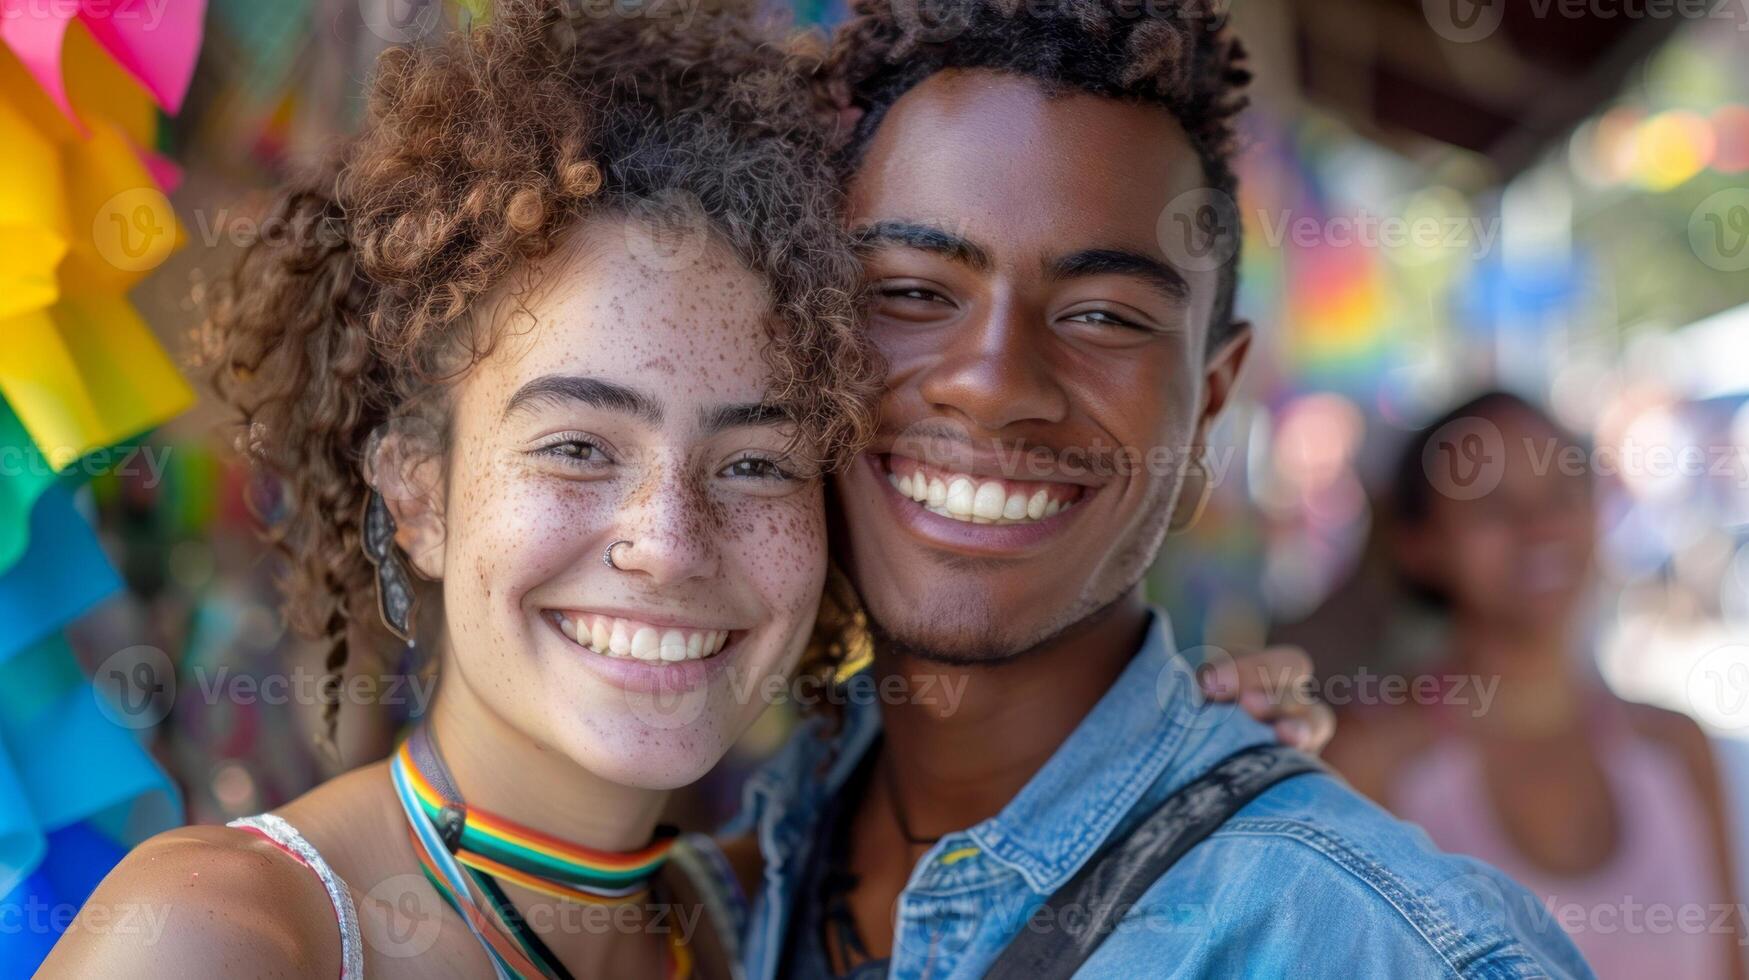 A young mix couple volunteering together at a community outreach event, pride month festival photo